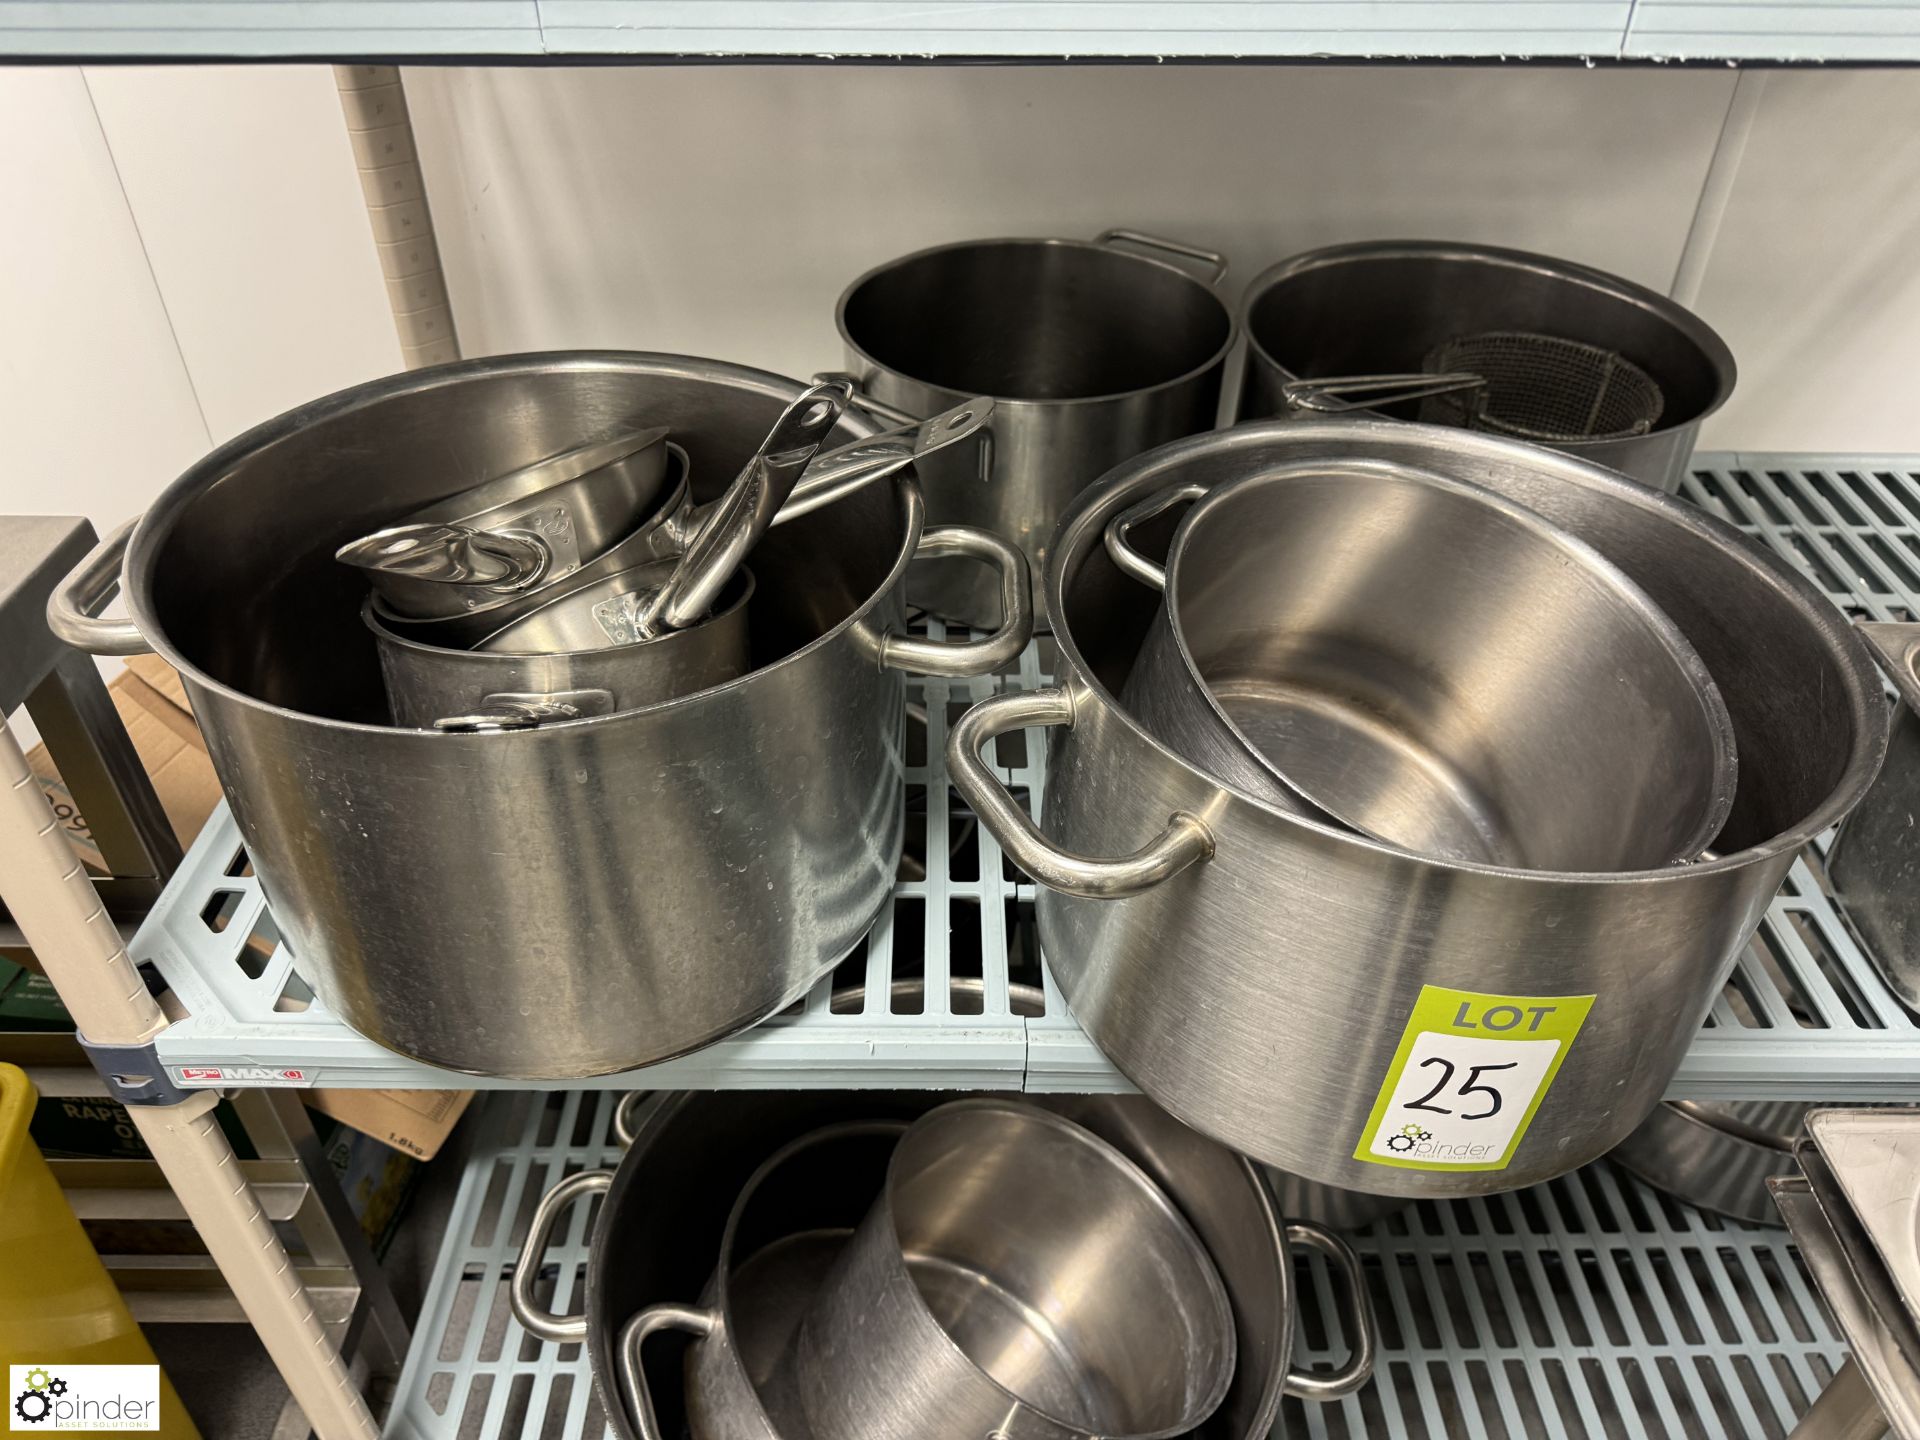 Large quantity stainless steel Cooking Pots, Bowls, Collanders, etc, to rack (rack not included) ( - Bild 4 aus 6